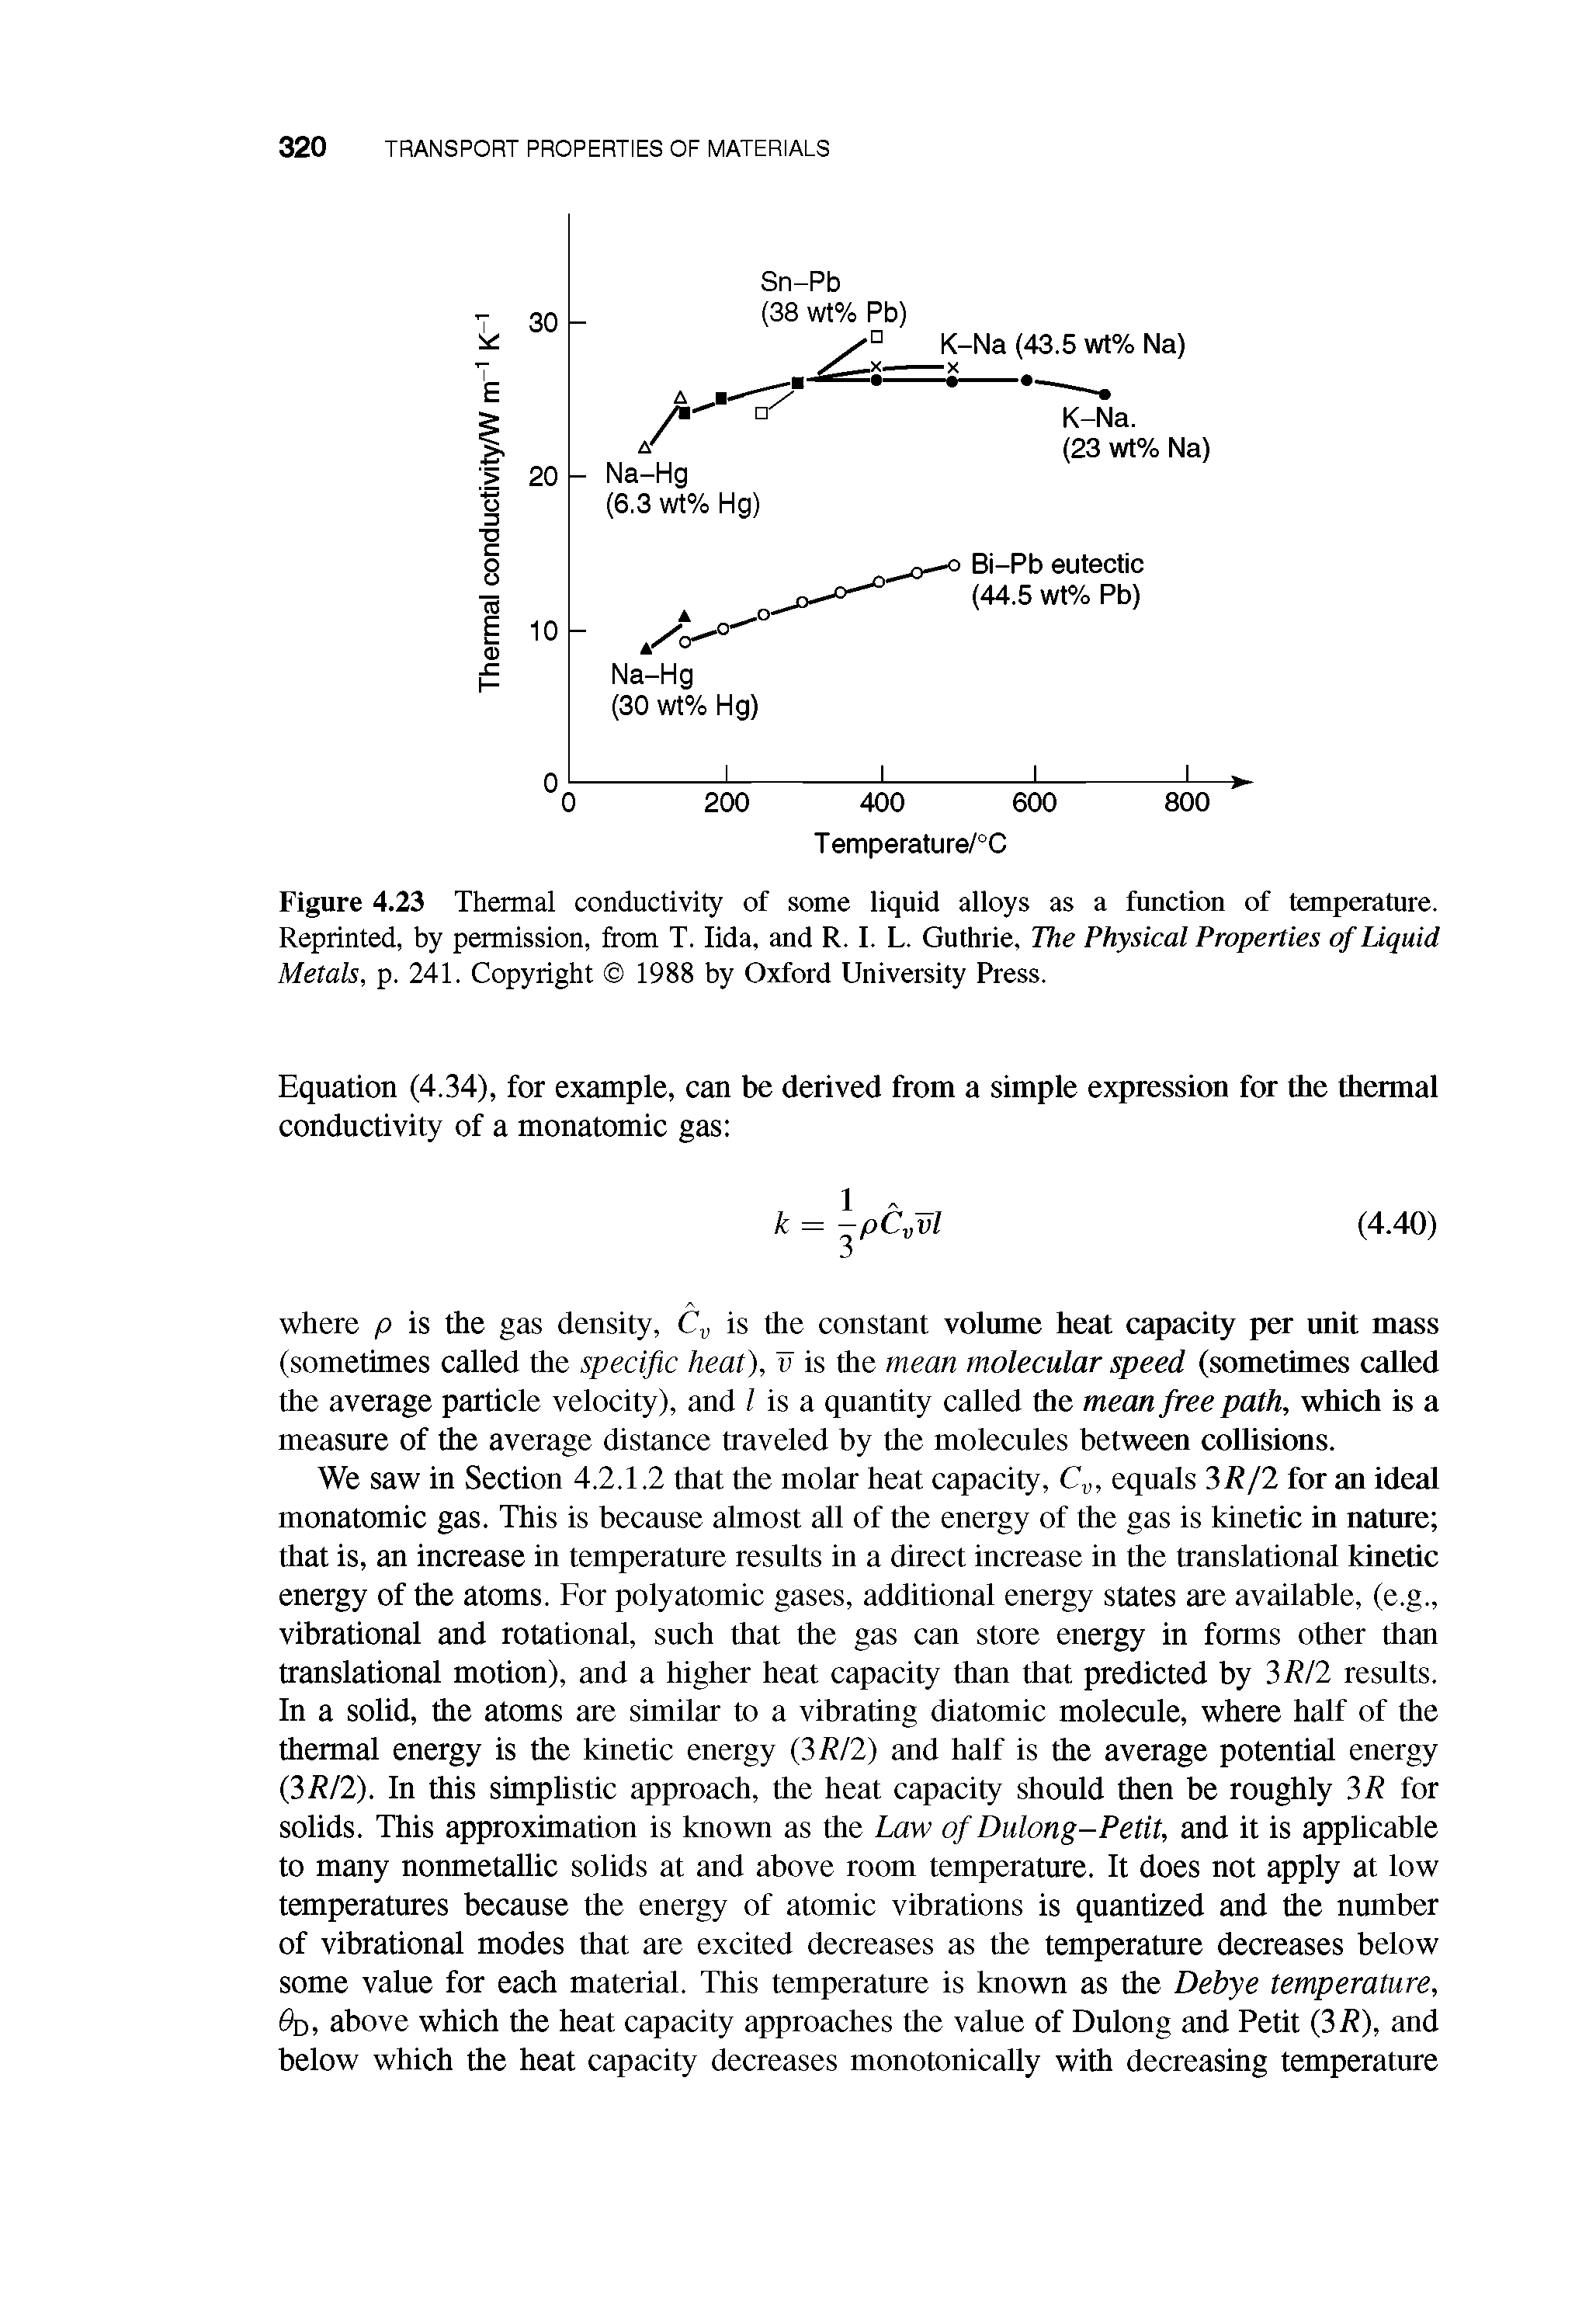 Figure 4.23 Thermal conductivity of some liquid alloys as a function of temperature. Reprinted, by permission, from T. lida, and R. I. L. Guthrie, The Physical Properties of Liquid Metals, p. 241. Copyright 1988 by Oxford University Press.